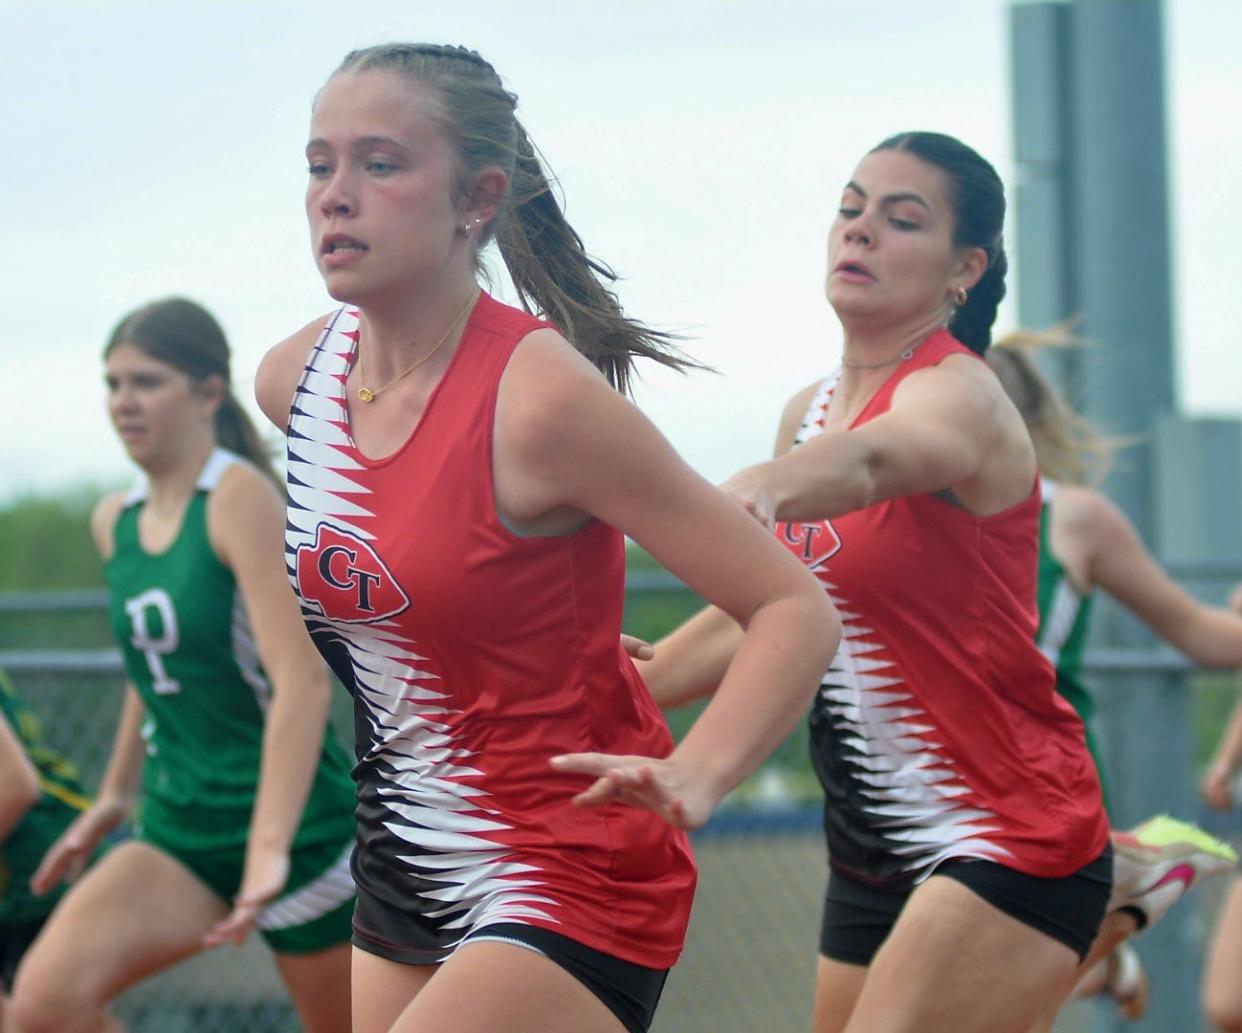 Conemaugh Township's Danika Black, left, reaches back to take the handoff from Ellie Speigle in the girls 4x100 relay at the Heritage Conference track and field championships, May 7, in Armagh.